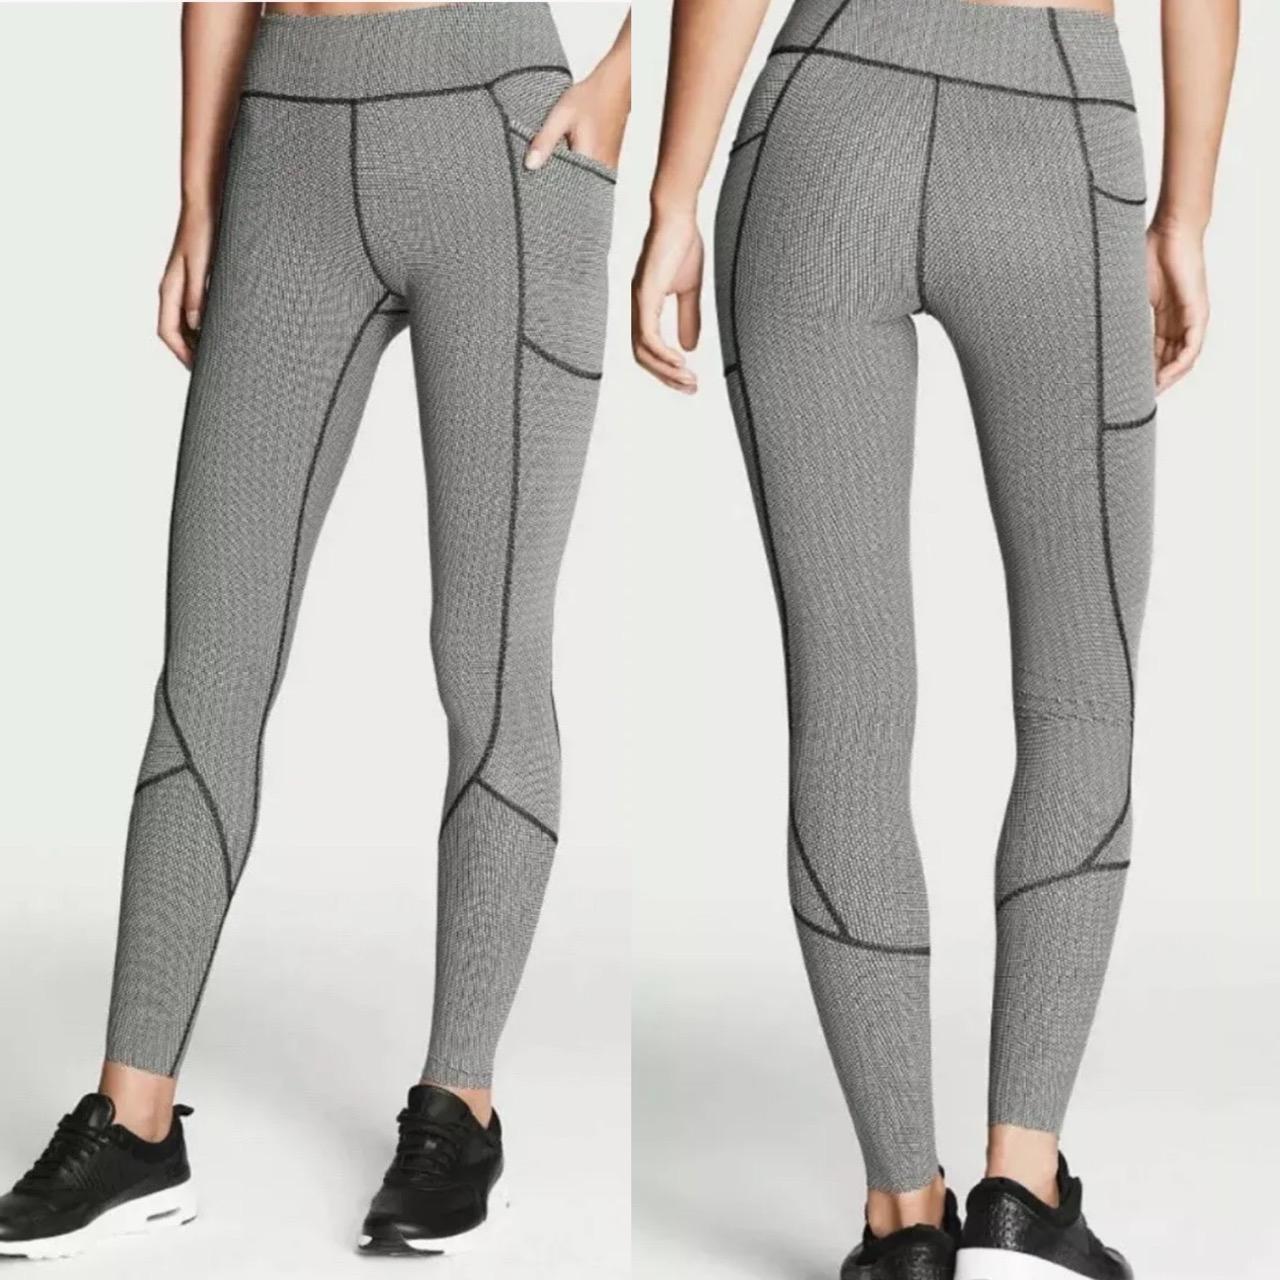 Victoria Sport Total Knockout Tight leggings